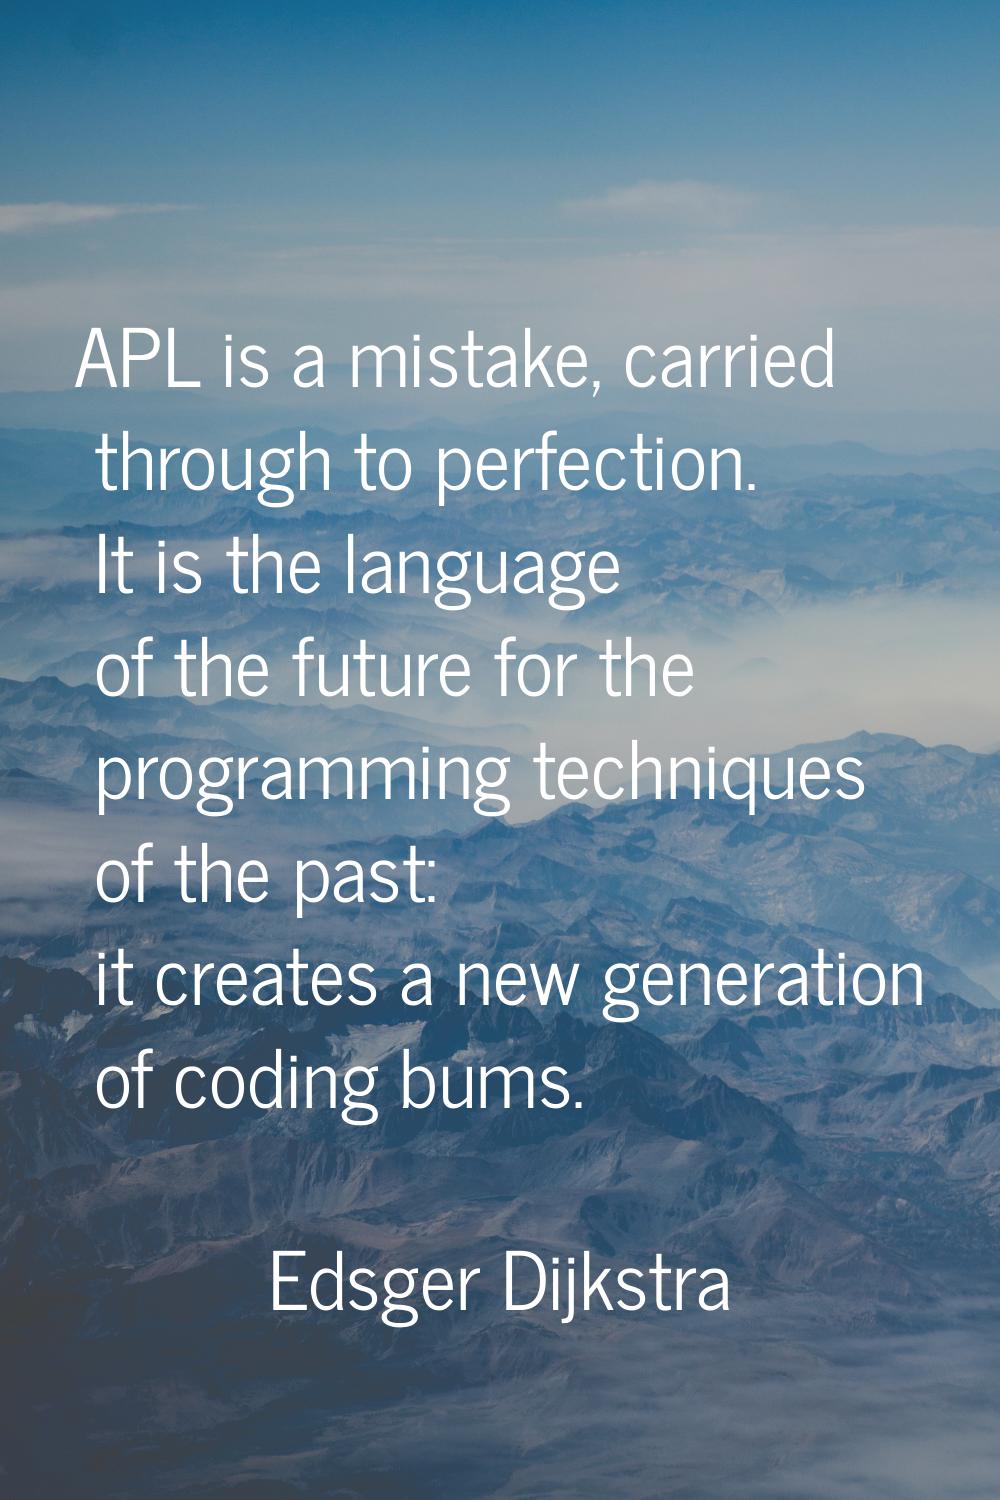 APL is a mistake, carried through to perfection. It is the language of the future for the programmi